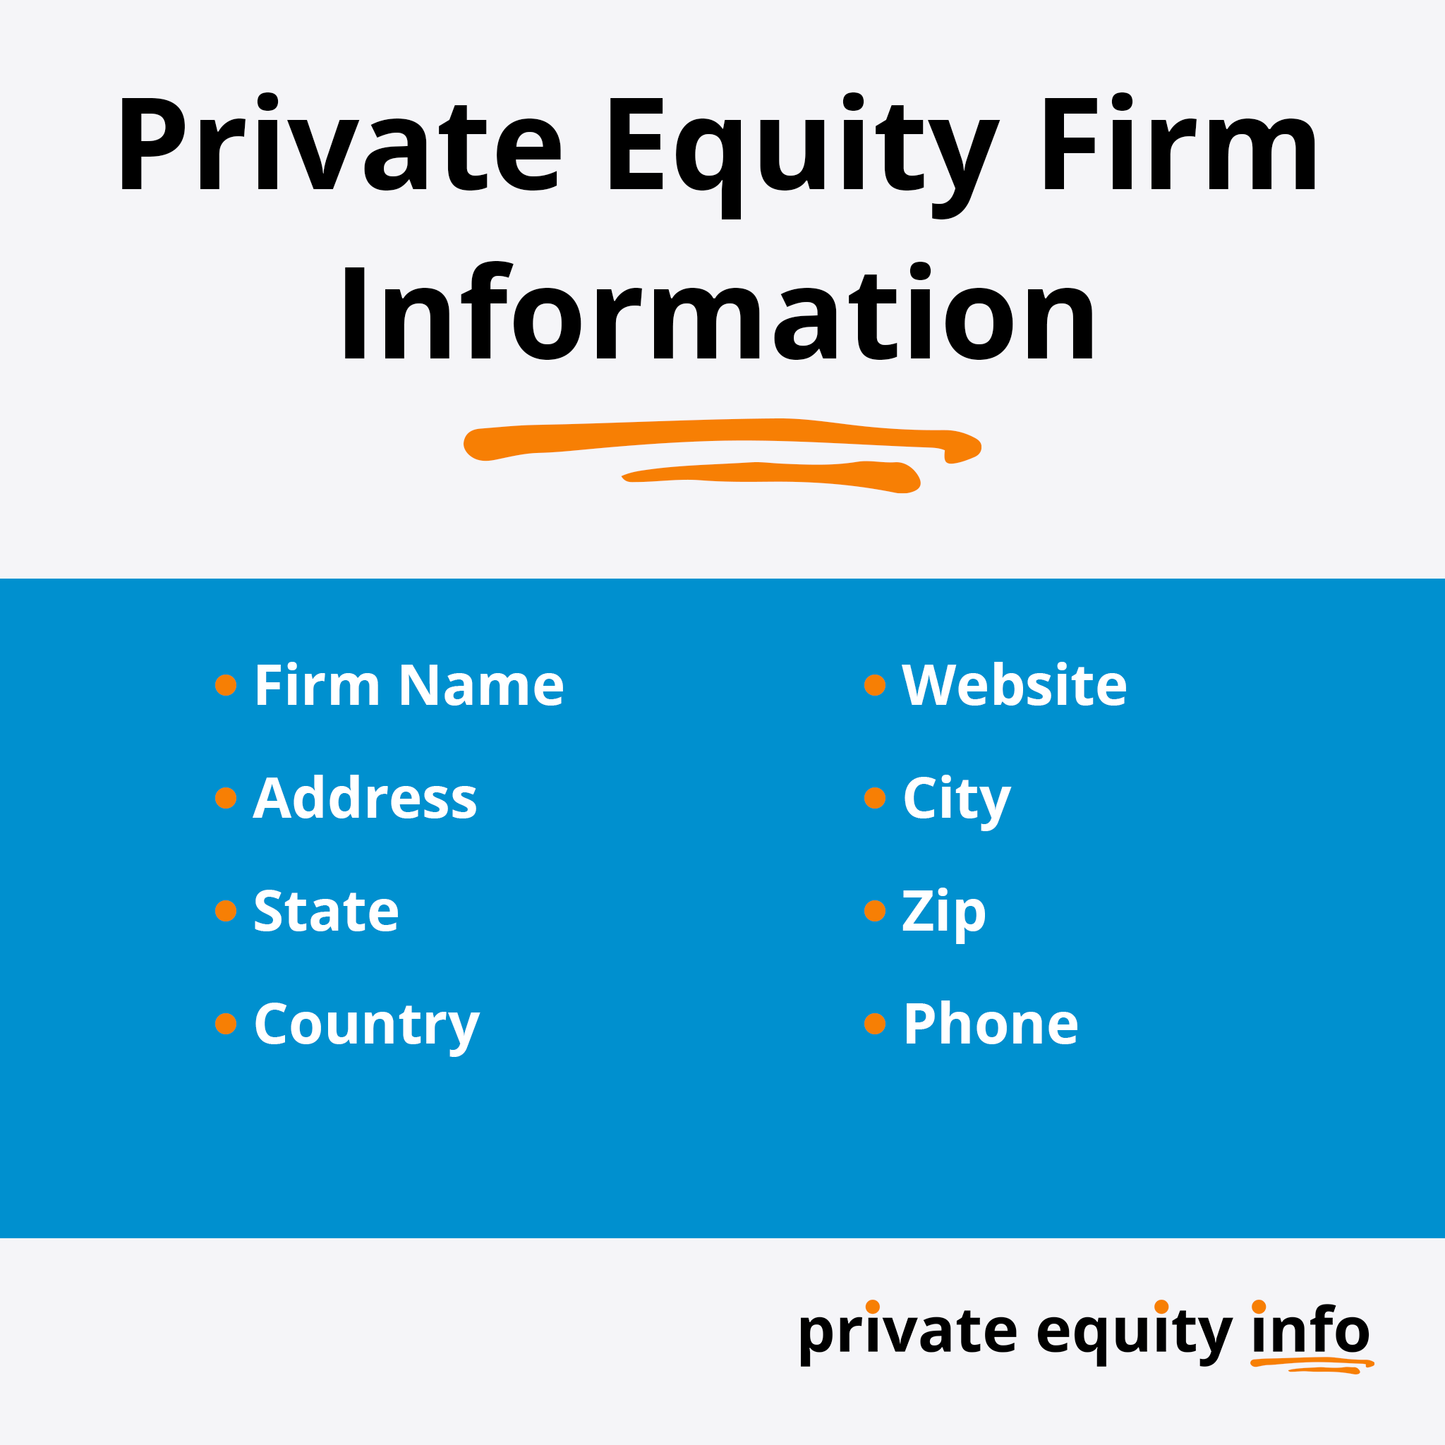 Private Equity Firms in Georgia and South Carolina